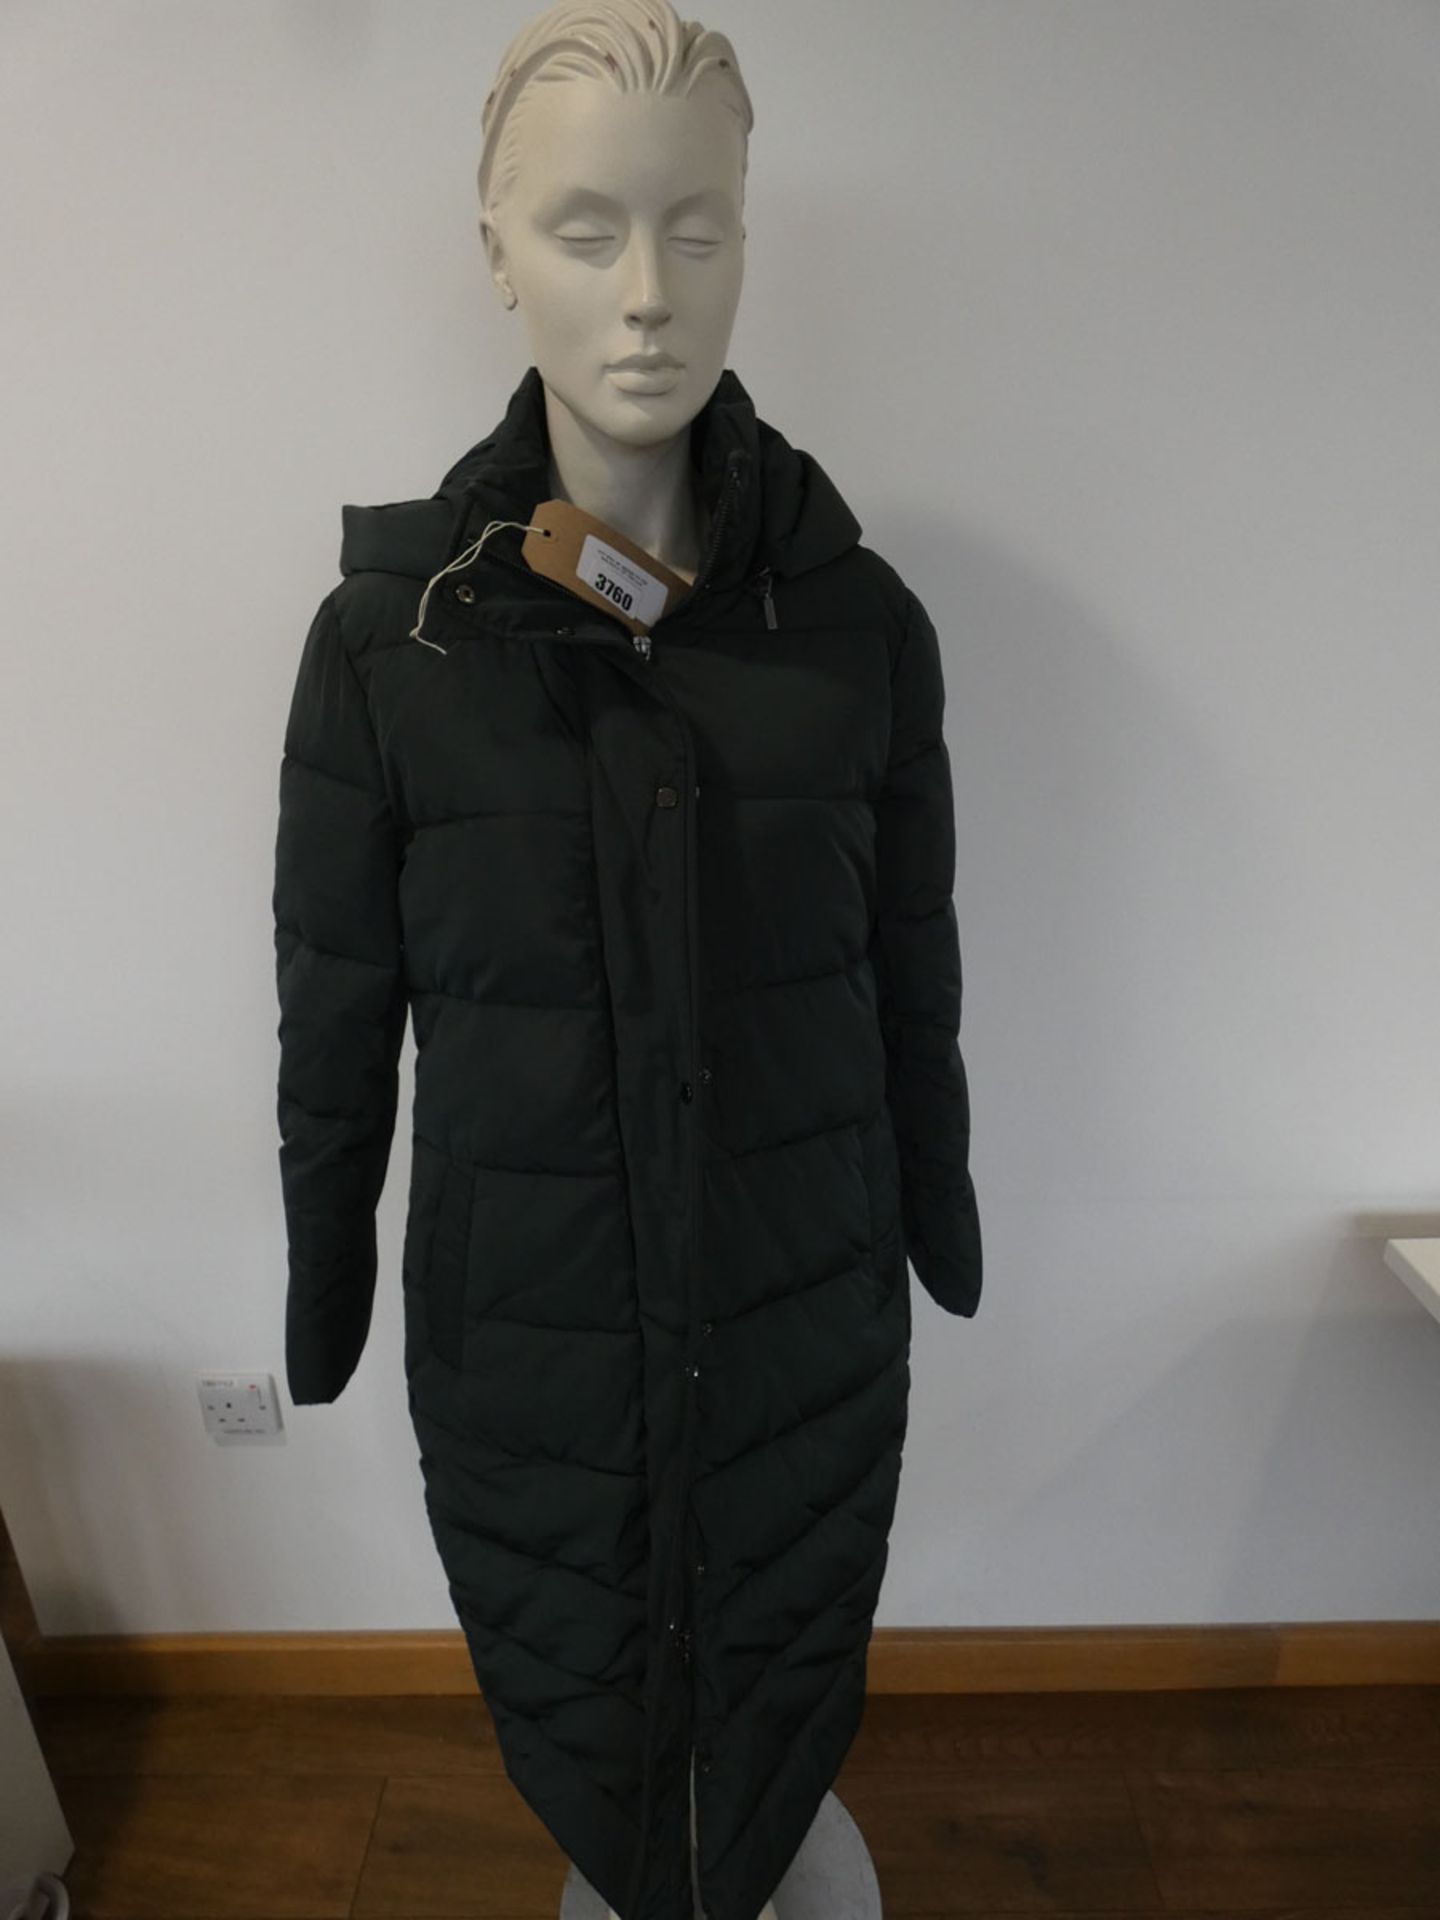 Hobbs ladies kelly puffer jacket in green size 10 (Mannequin not included)